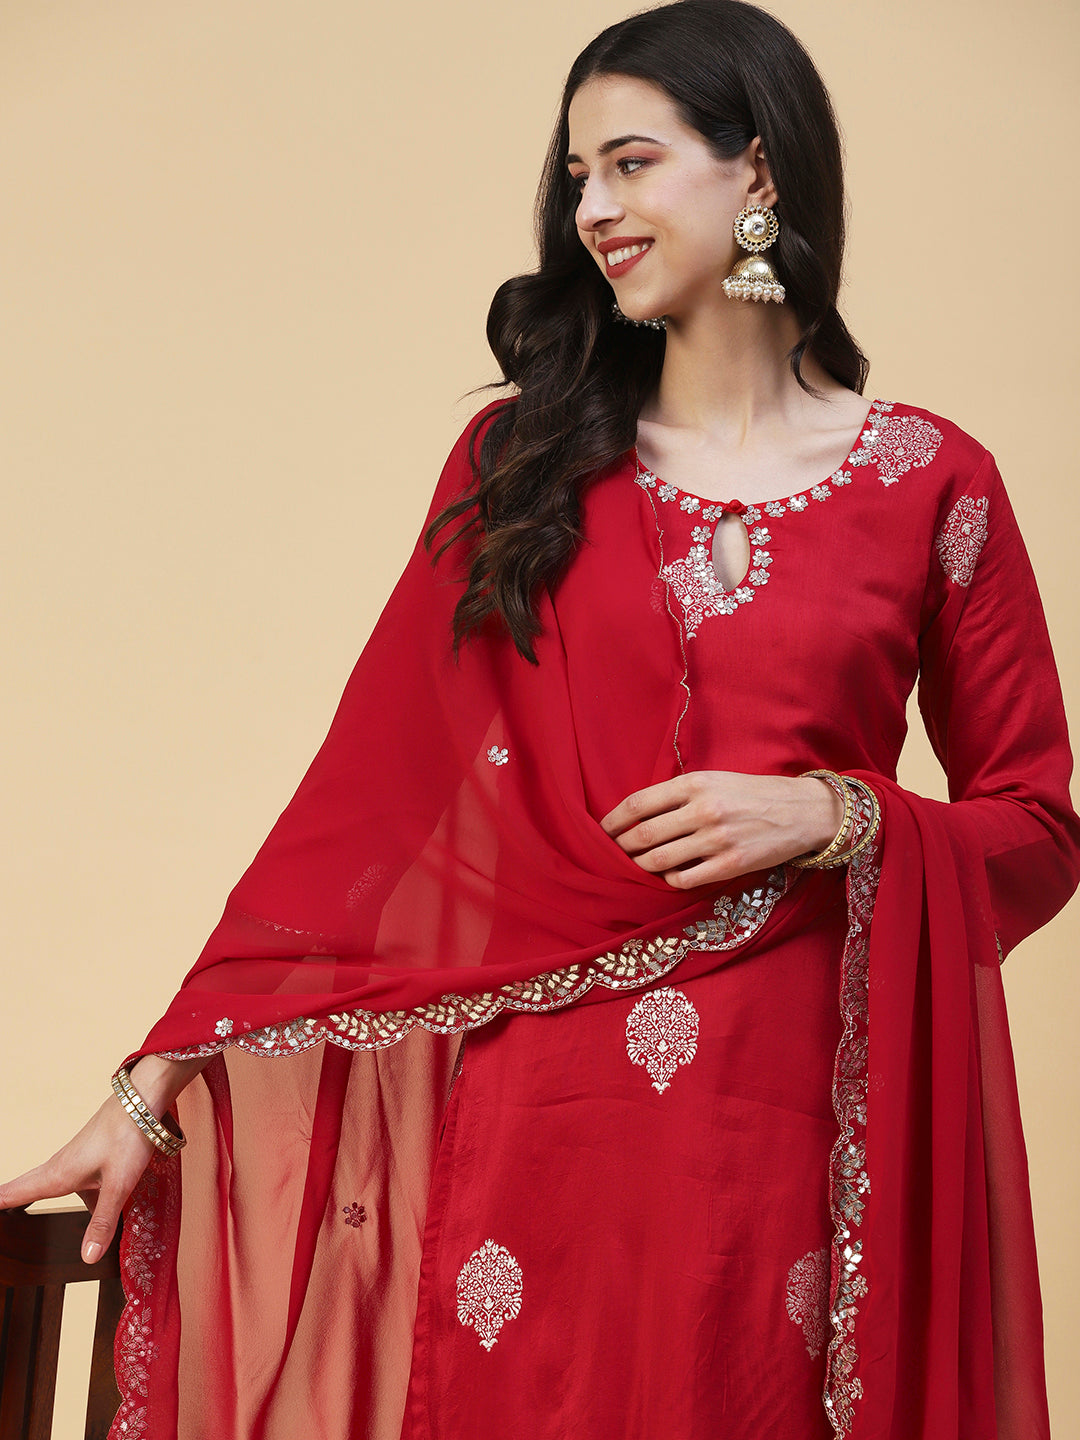 Ethnic Woven & Hand Embroidered Straight Kurta with Pant & Dupatta - Red